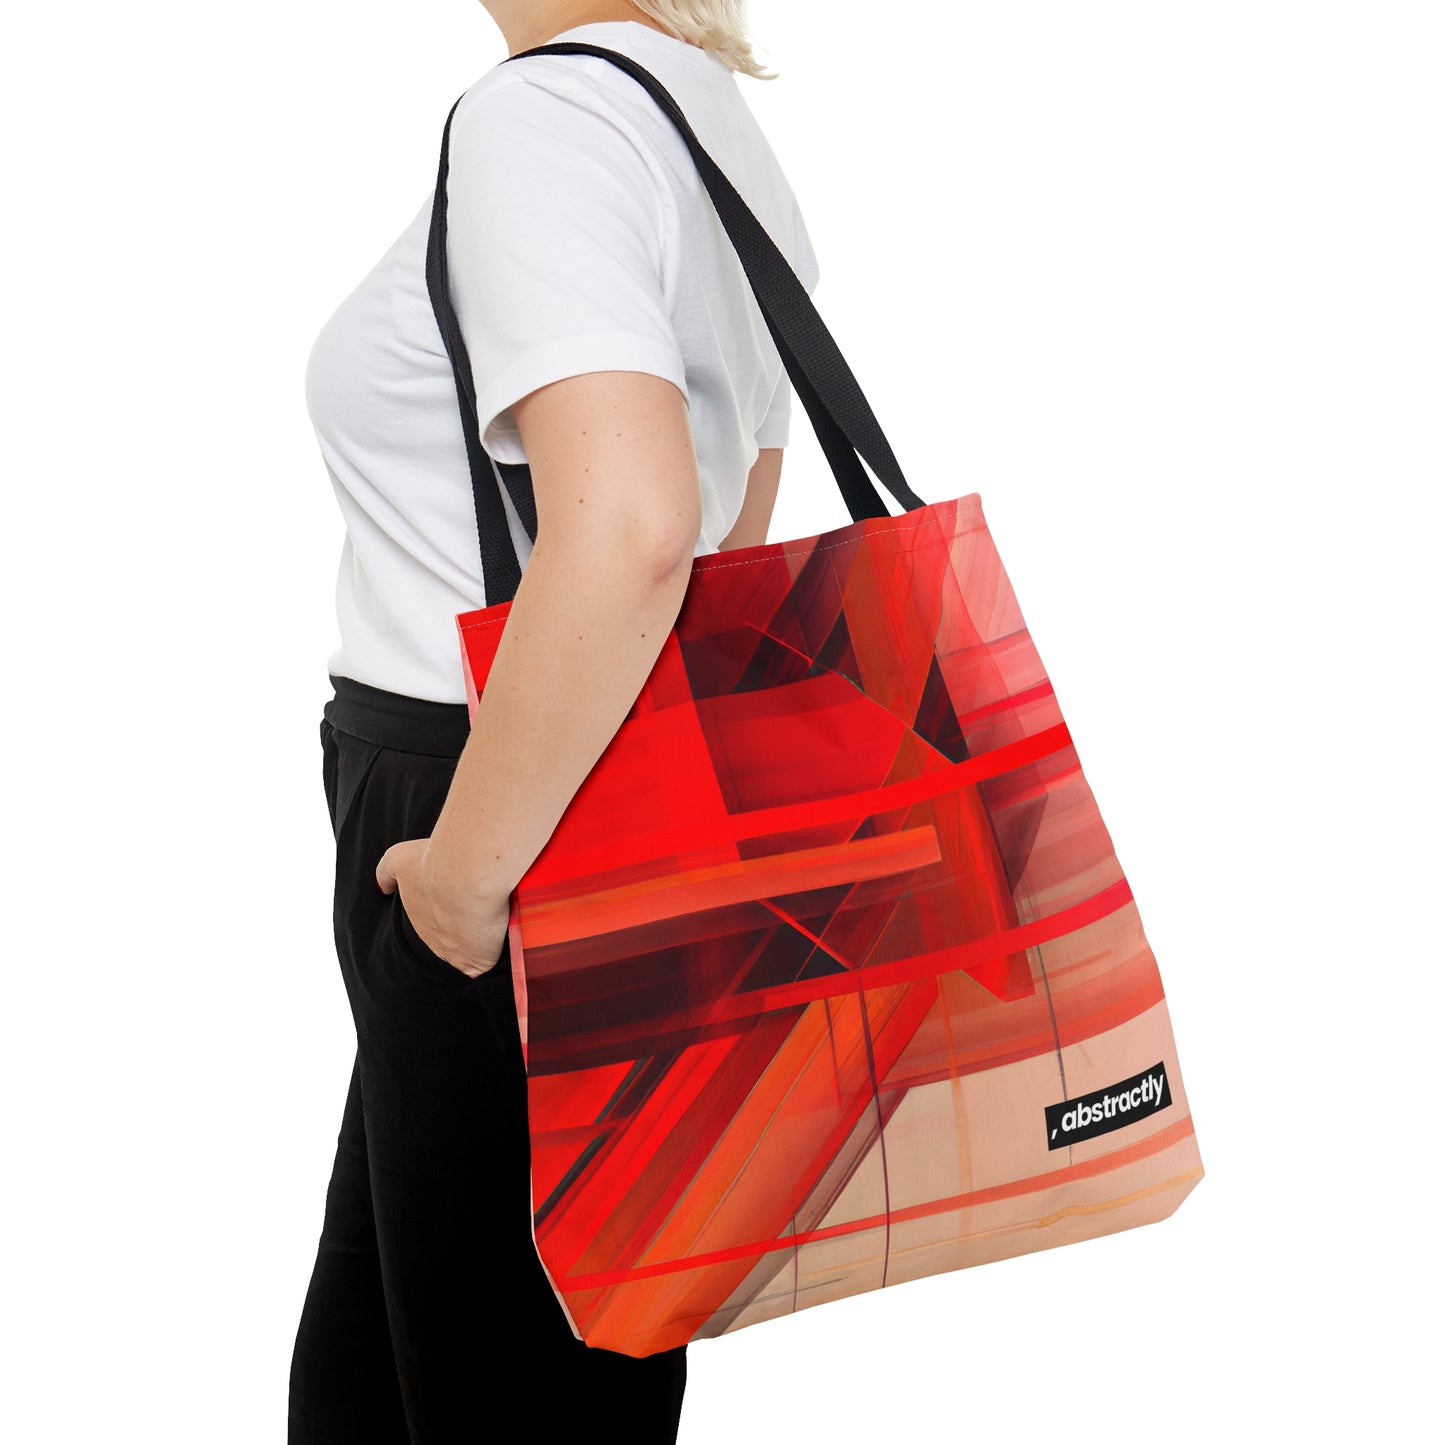 Elaine Stryker - Electric Force, Abstractly - Tote